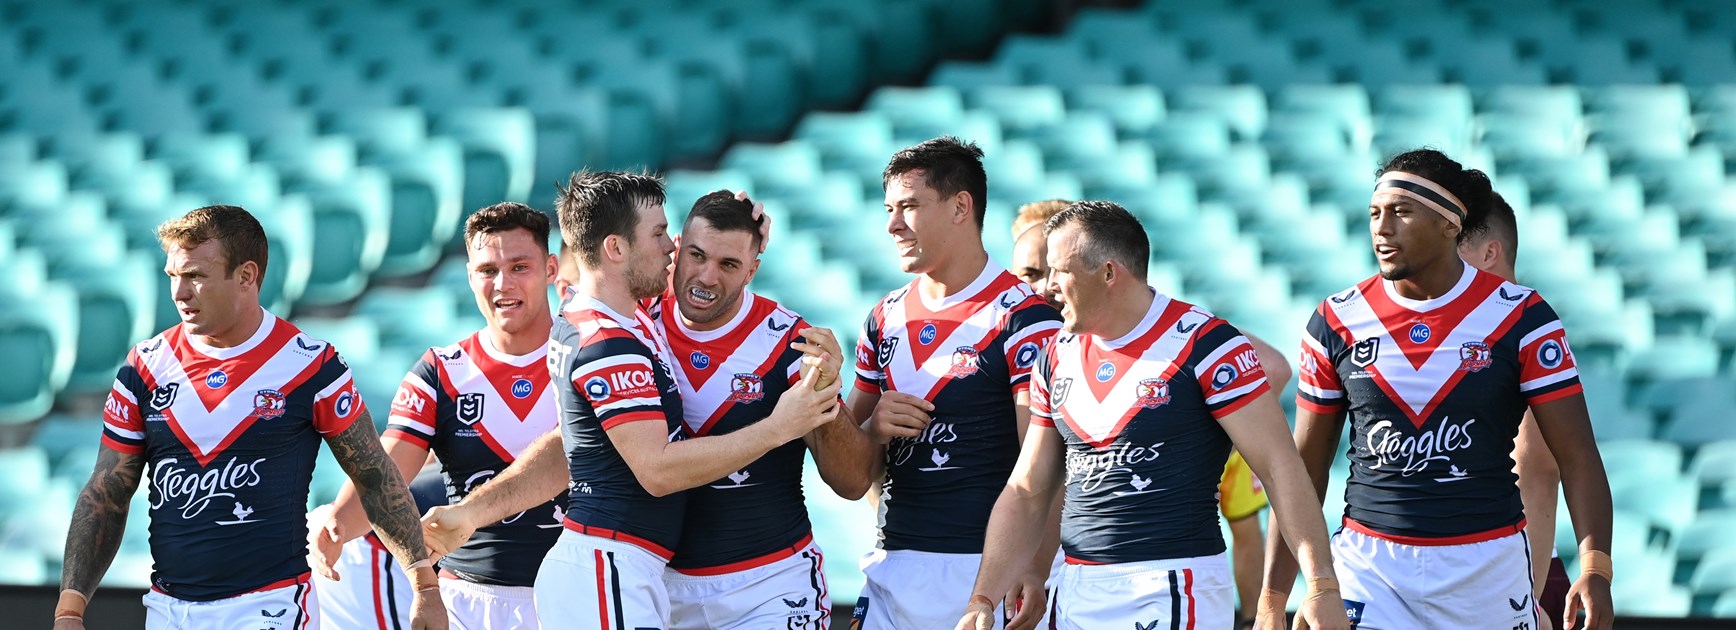 Tedesco Stars as Roosters Run Riot in SCG Spectacle